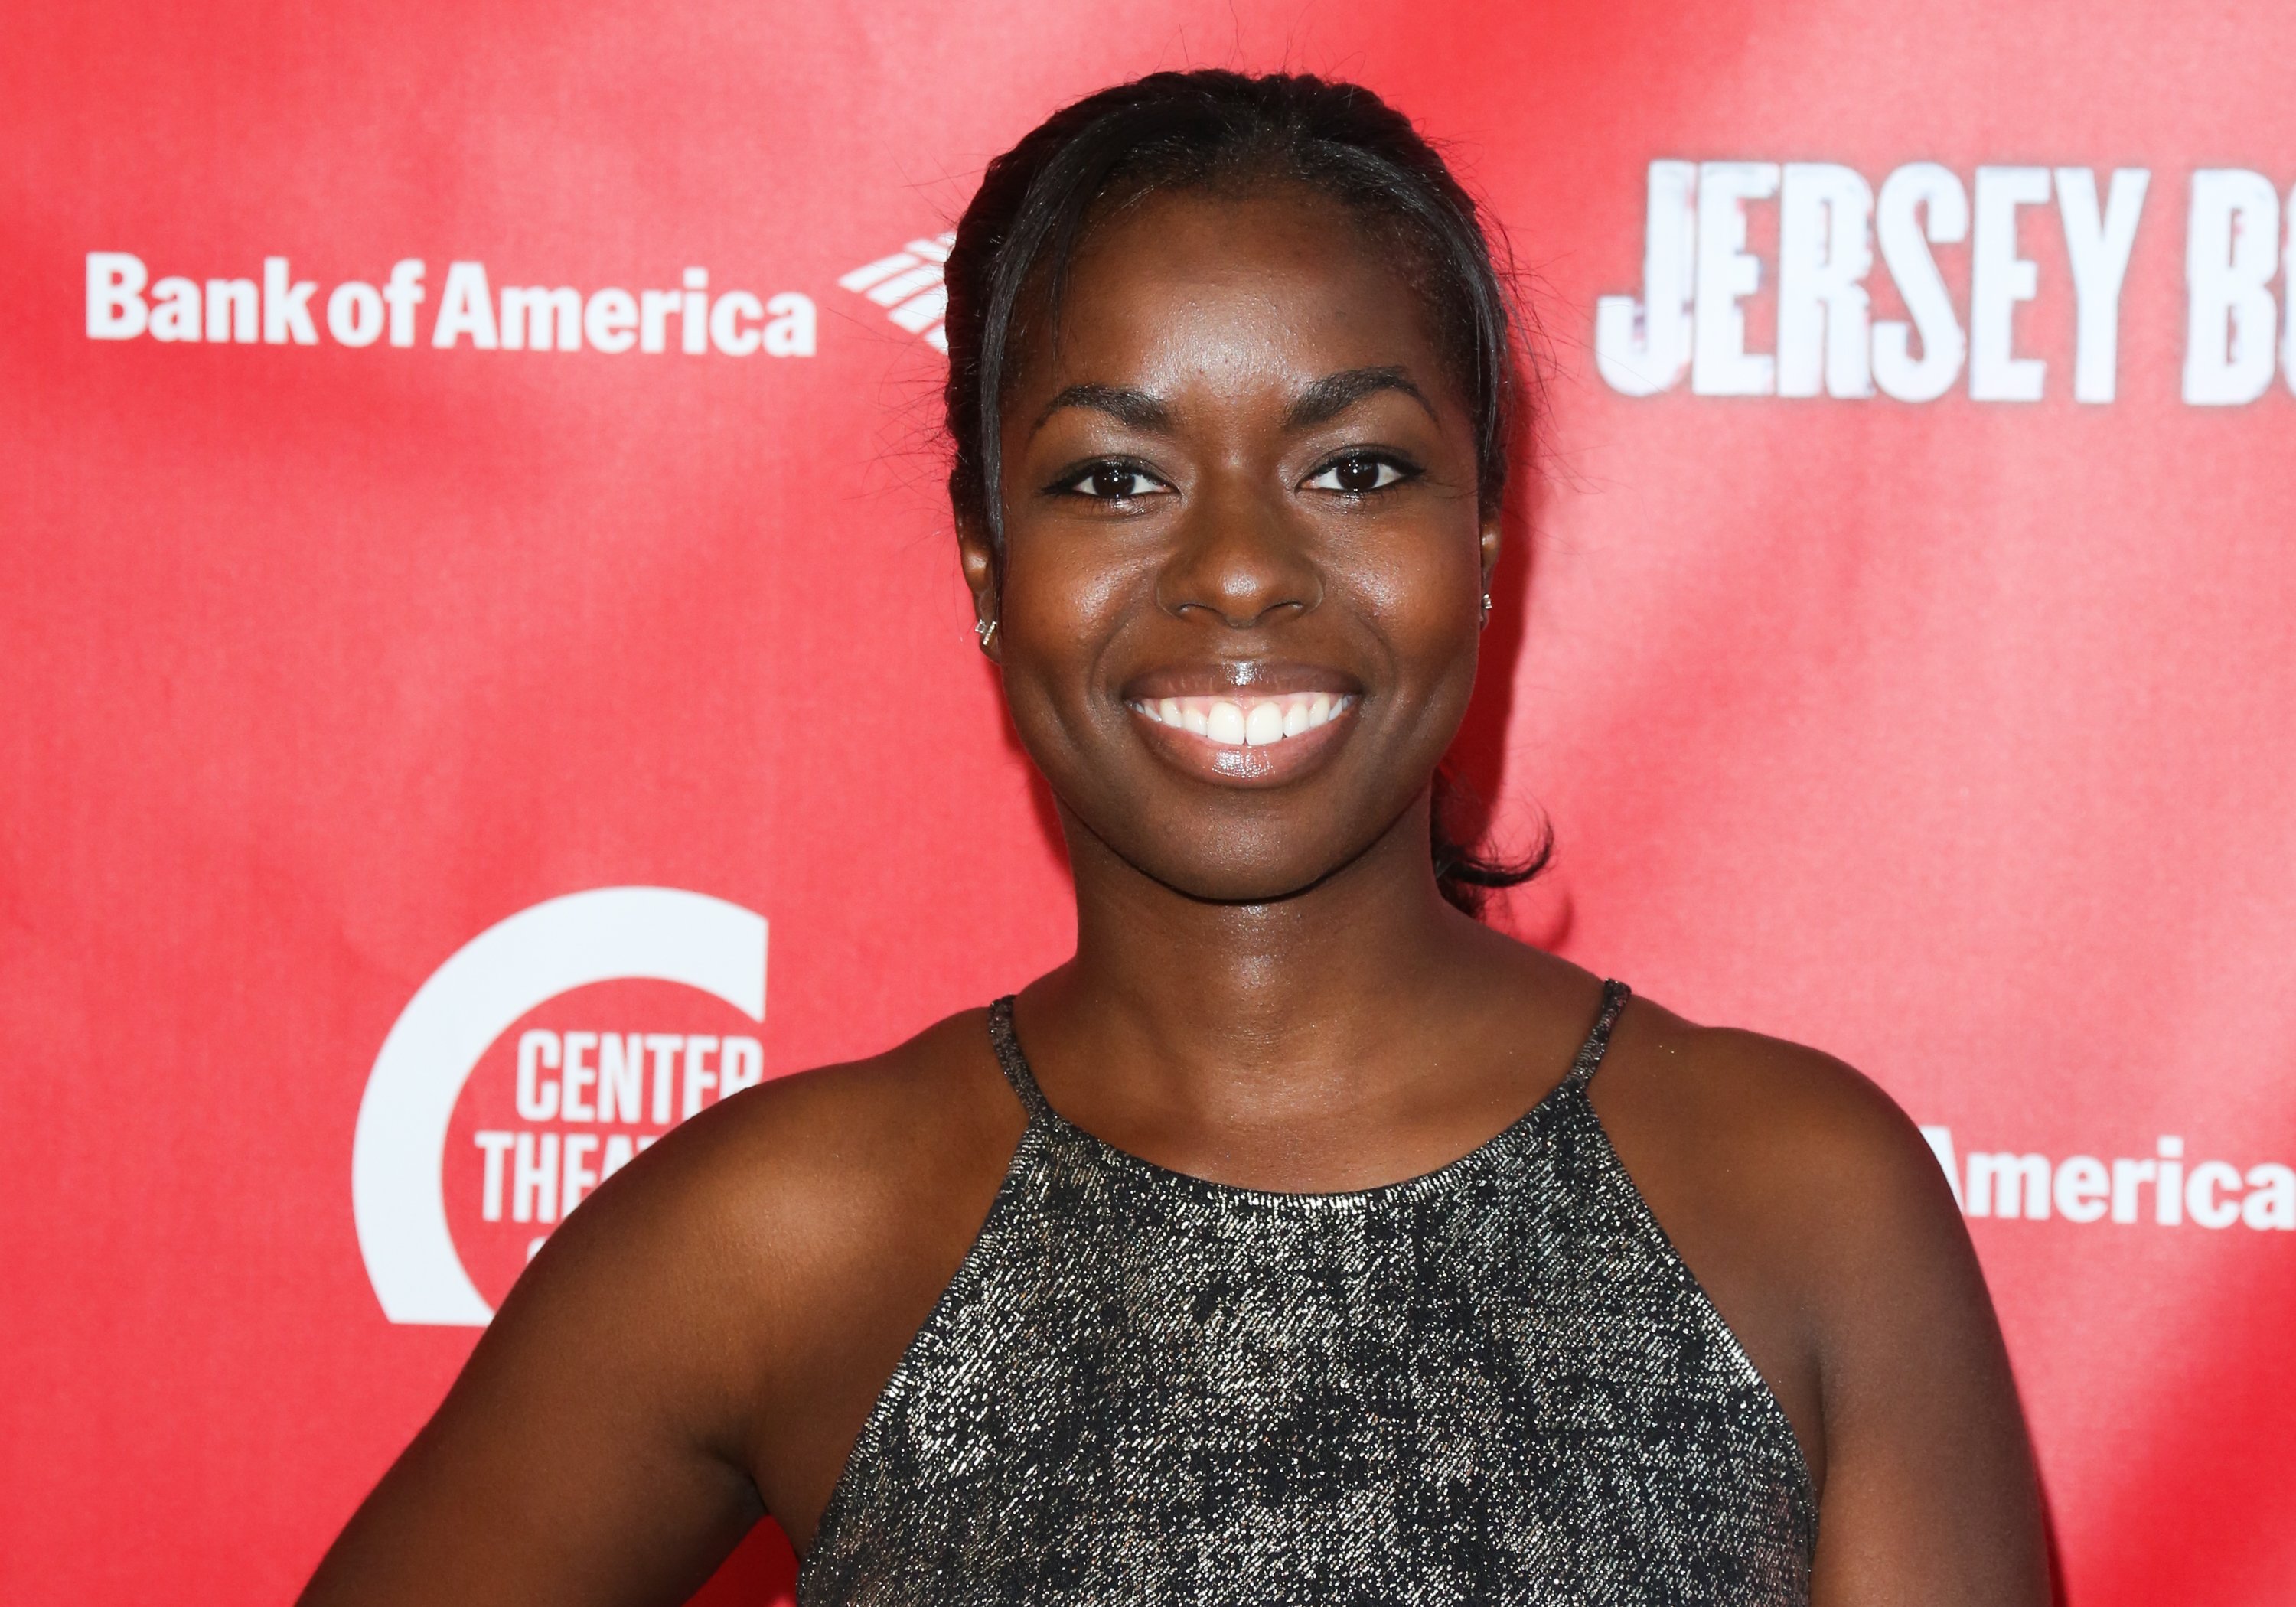 Camille Winbush pictured at the opening night of "Jersey Boys" at the Ahmanson Theatre on May 18, 2017 in Los Angeles, California.| Photo: Getty Images